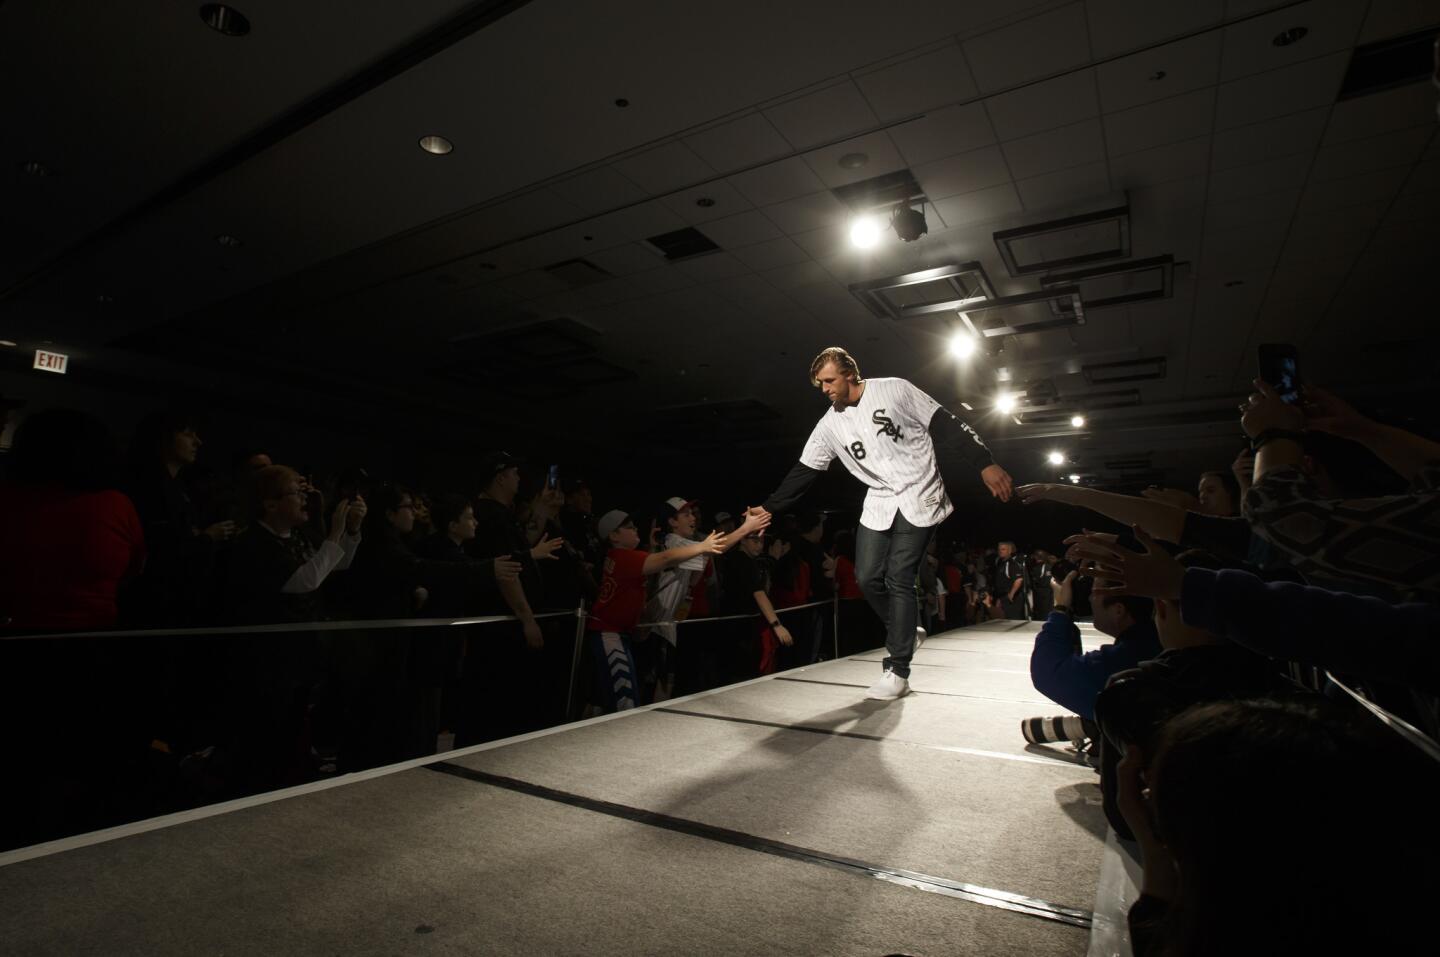 White Sox pitcher Michael Kopech walks on stage during the opening ceremony of SoxFest 2018 at the Hilton Chicago on Friday, Jan. 26, 2018.